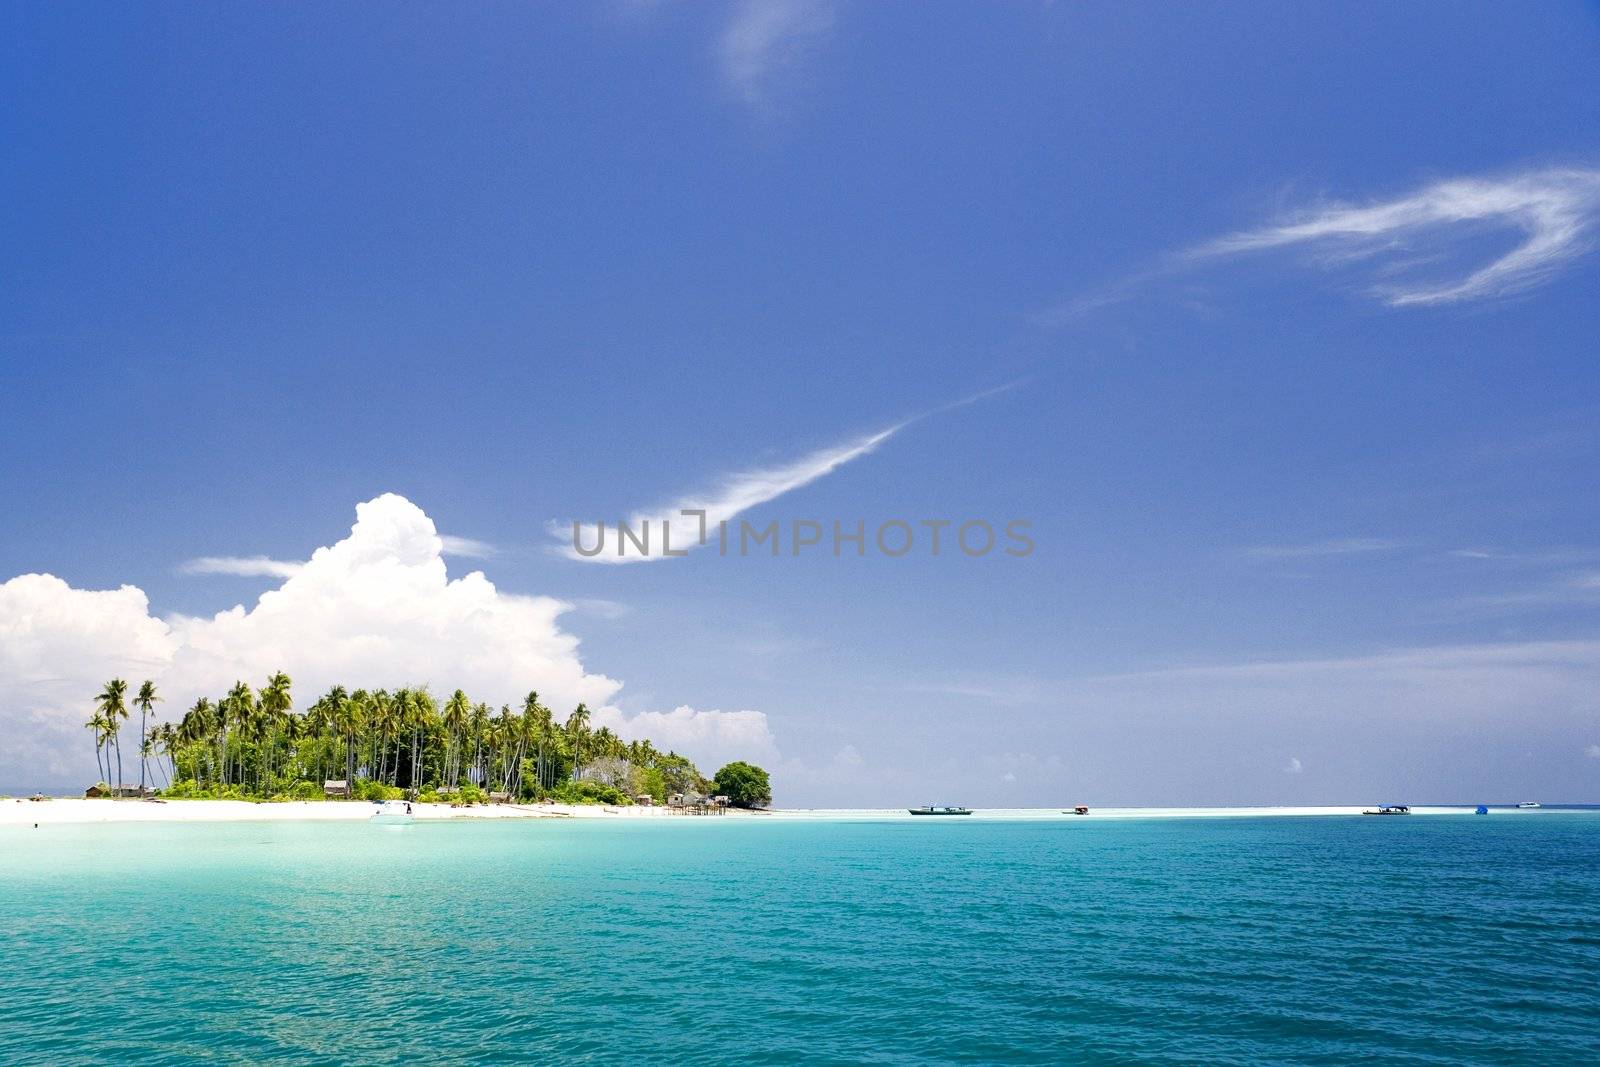 Image of a remote Malaysian tropical island with deep blue skies, crystal clear waters and coconut trees.